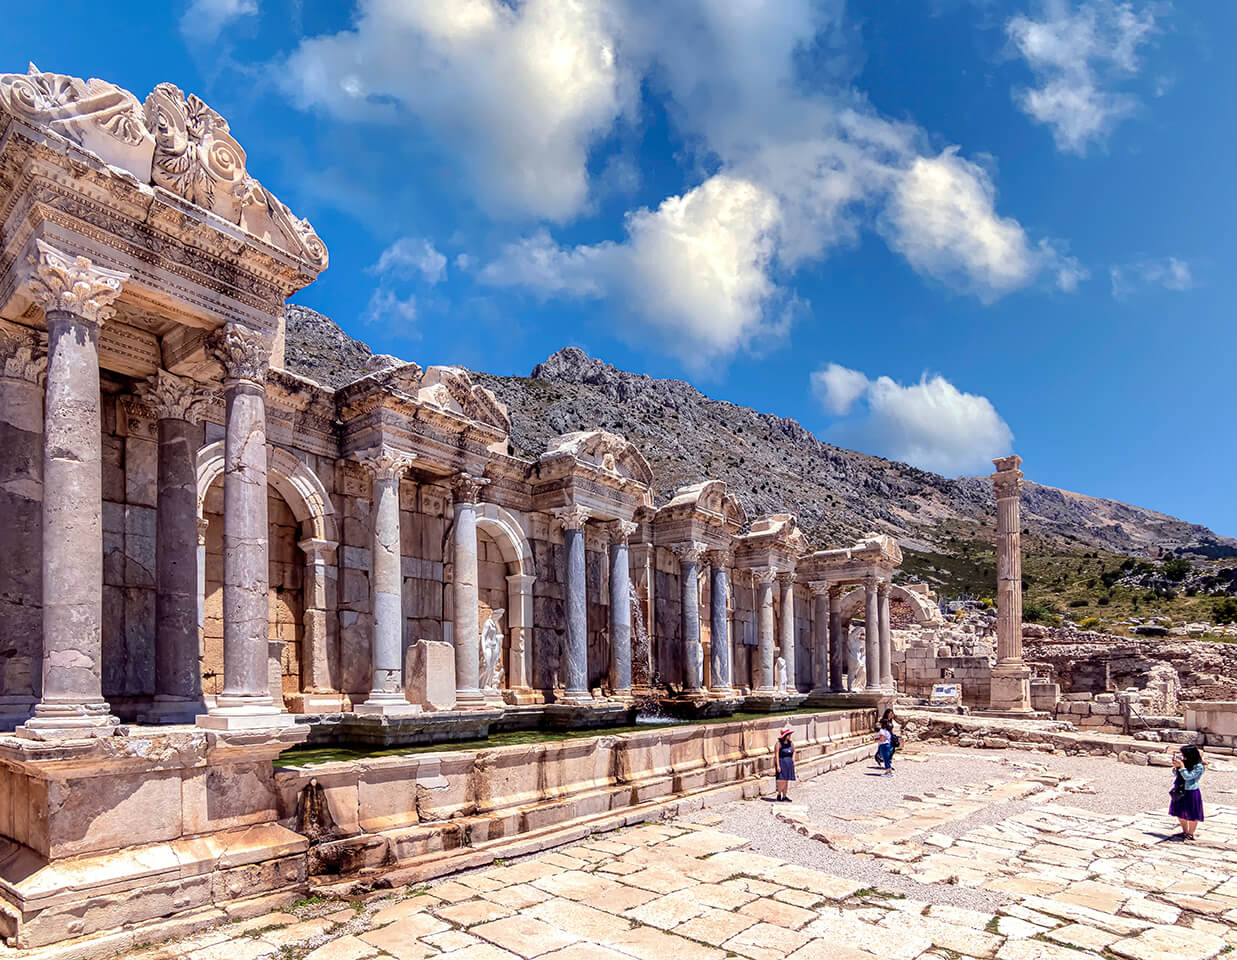 Discover Turkey's rich history with a visit to its famous ancient cities. Explore the well-preserved ruins of Ephesus, Hierapolis, Perge, and Troy and step back in time.